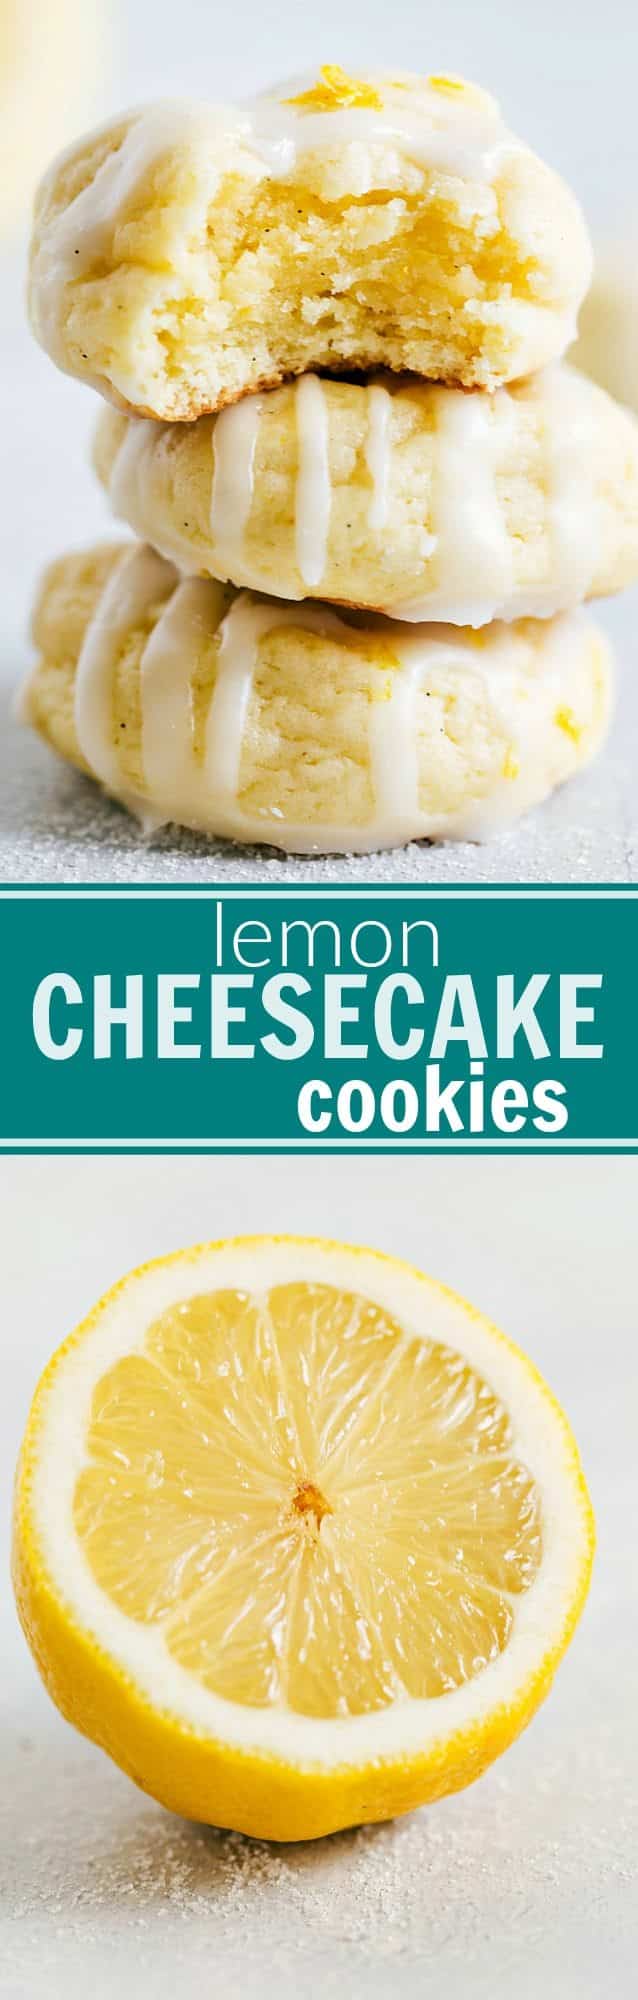 The ultimate BEST EVER Lemon Cheesecake soft-baked cookies! via chelseasmessyapron.com